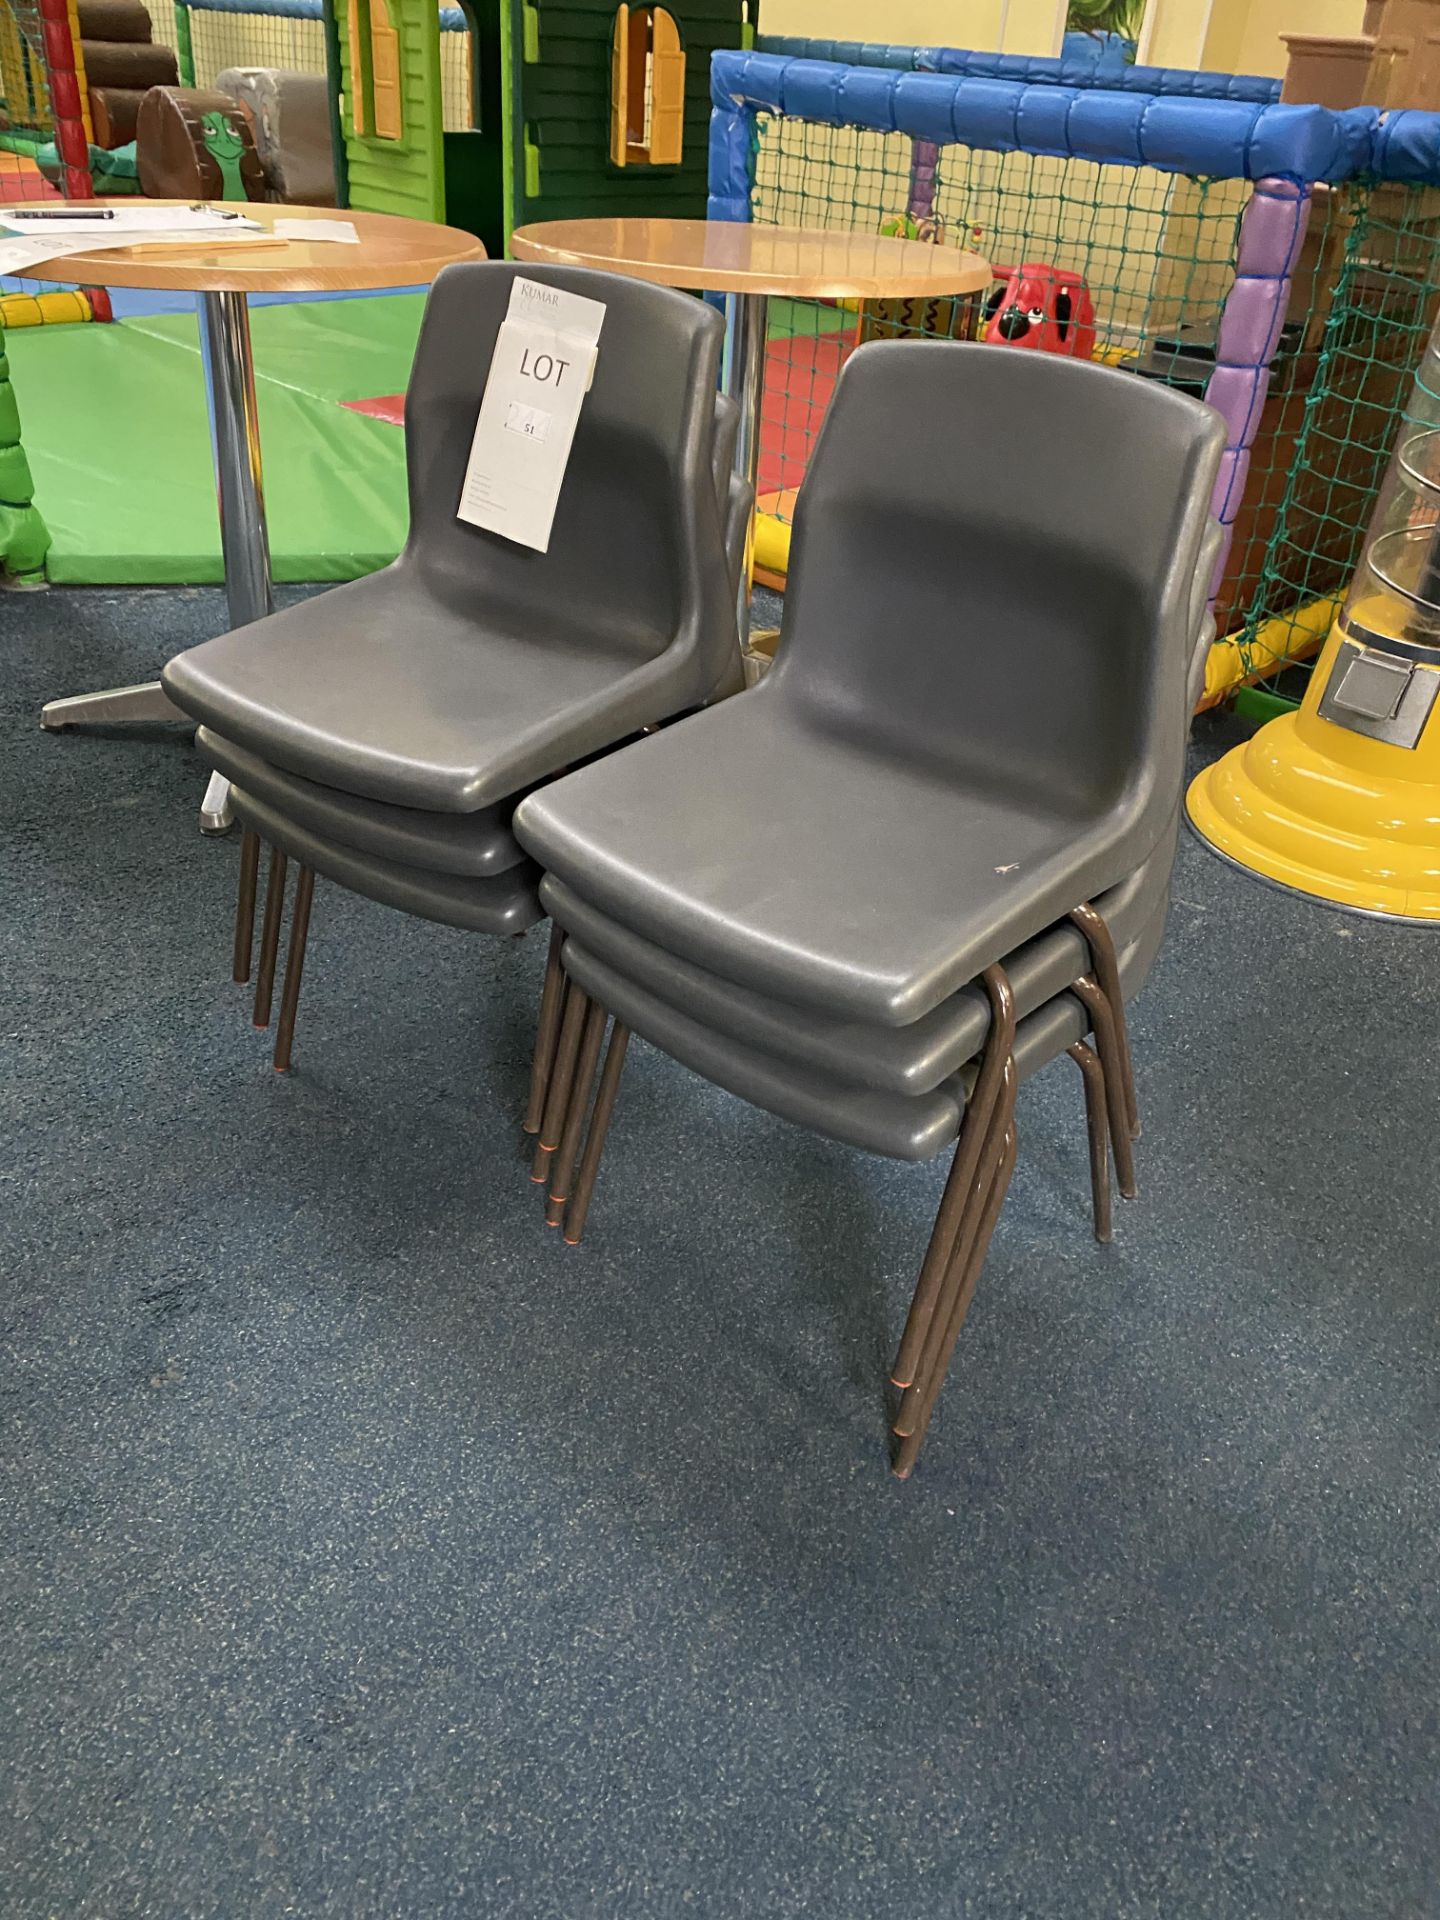 6x Small Plastic Children's Chairs - Image 4 of 4